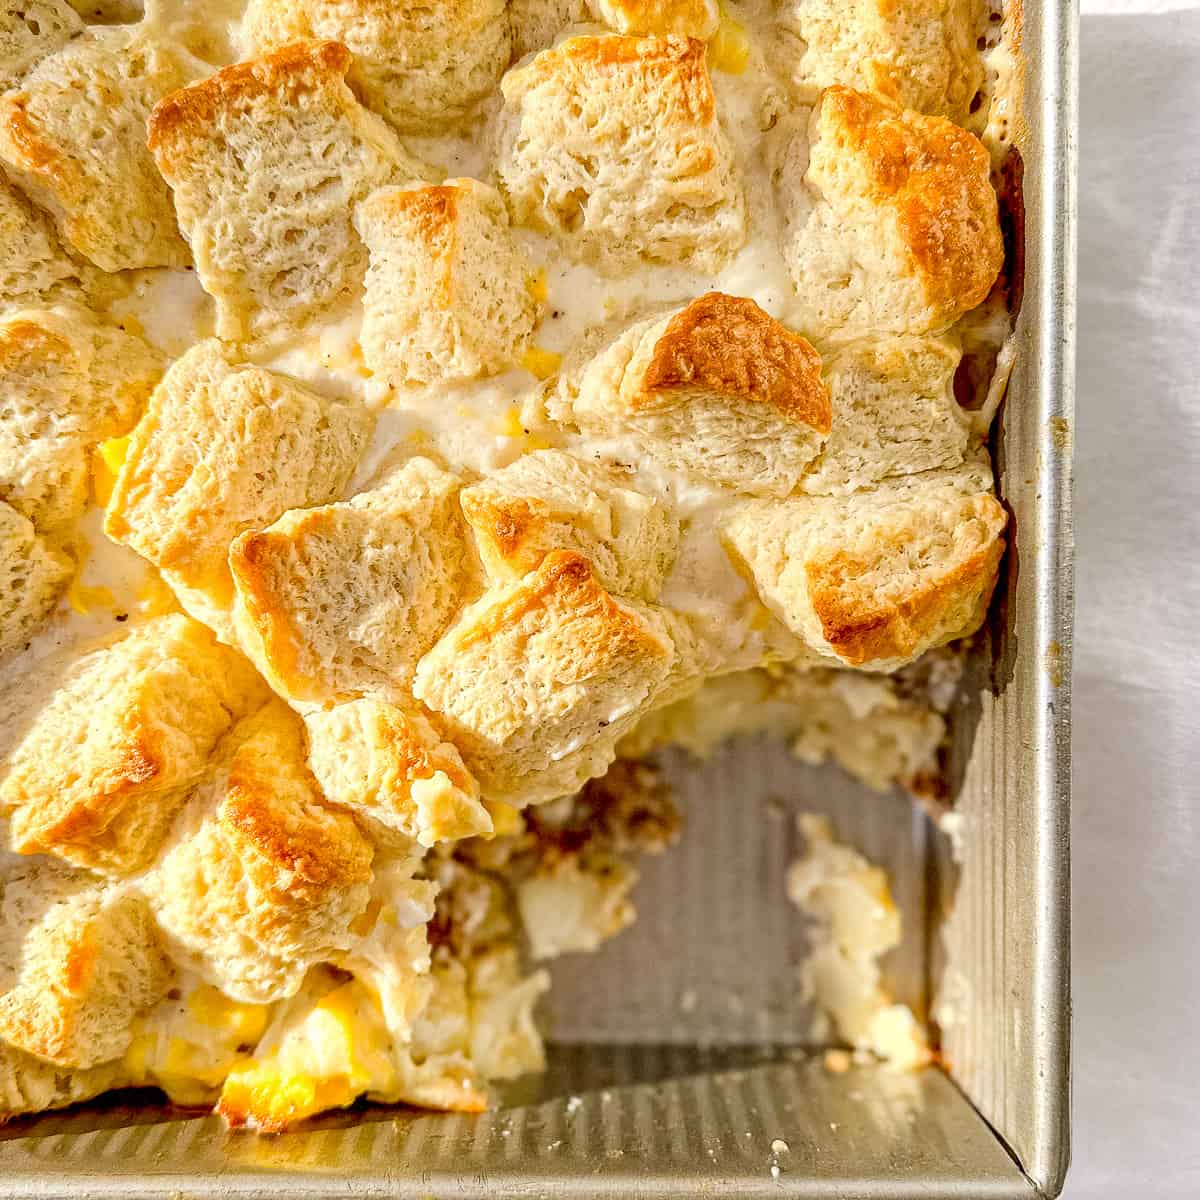 Serving up a Biscuits and Gravy breakfast casserole topped with homemade buttermilk biscuits.